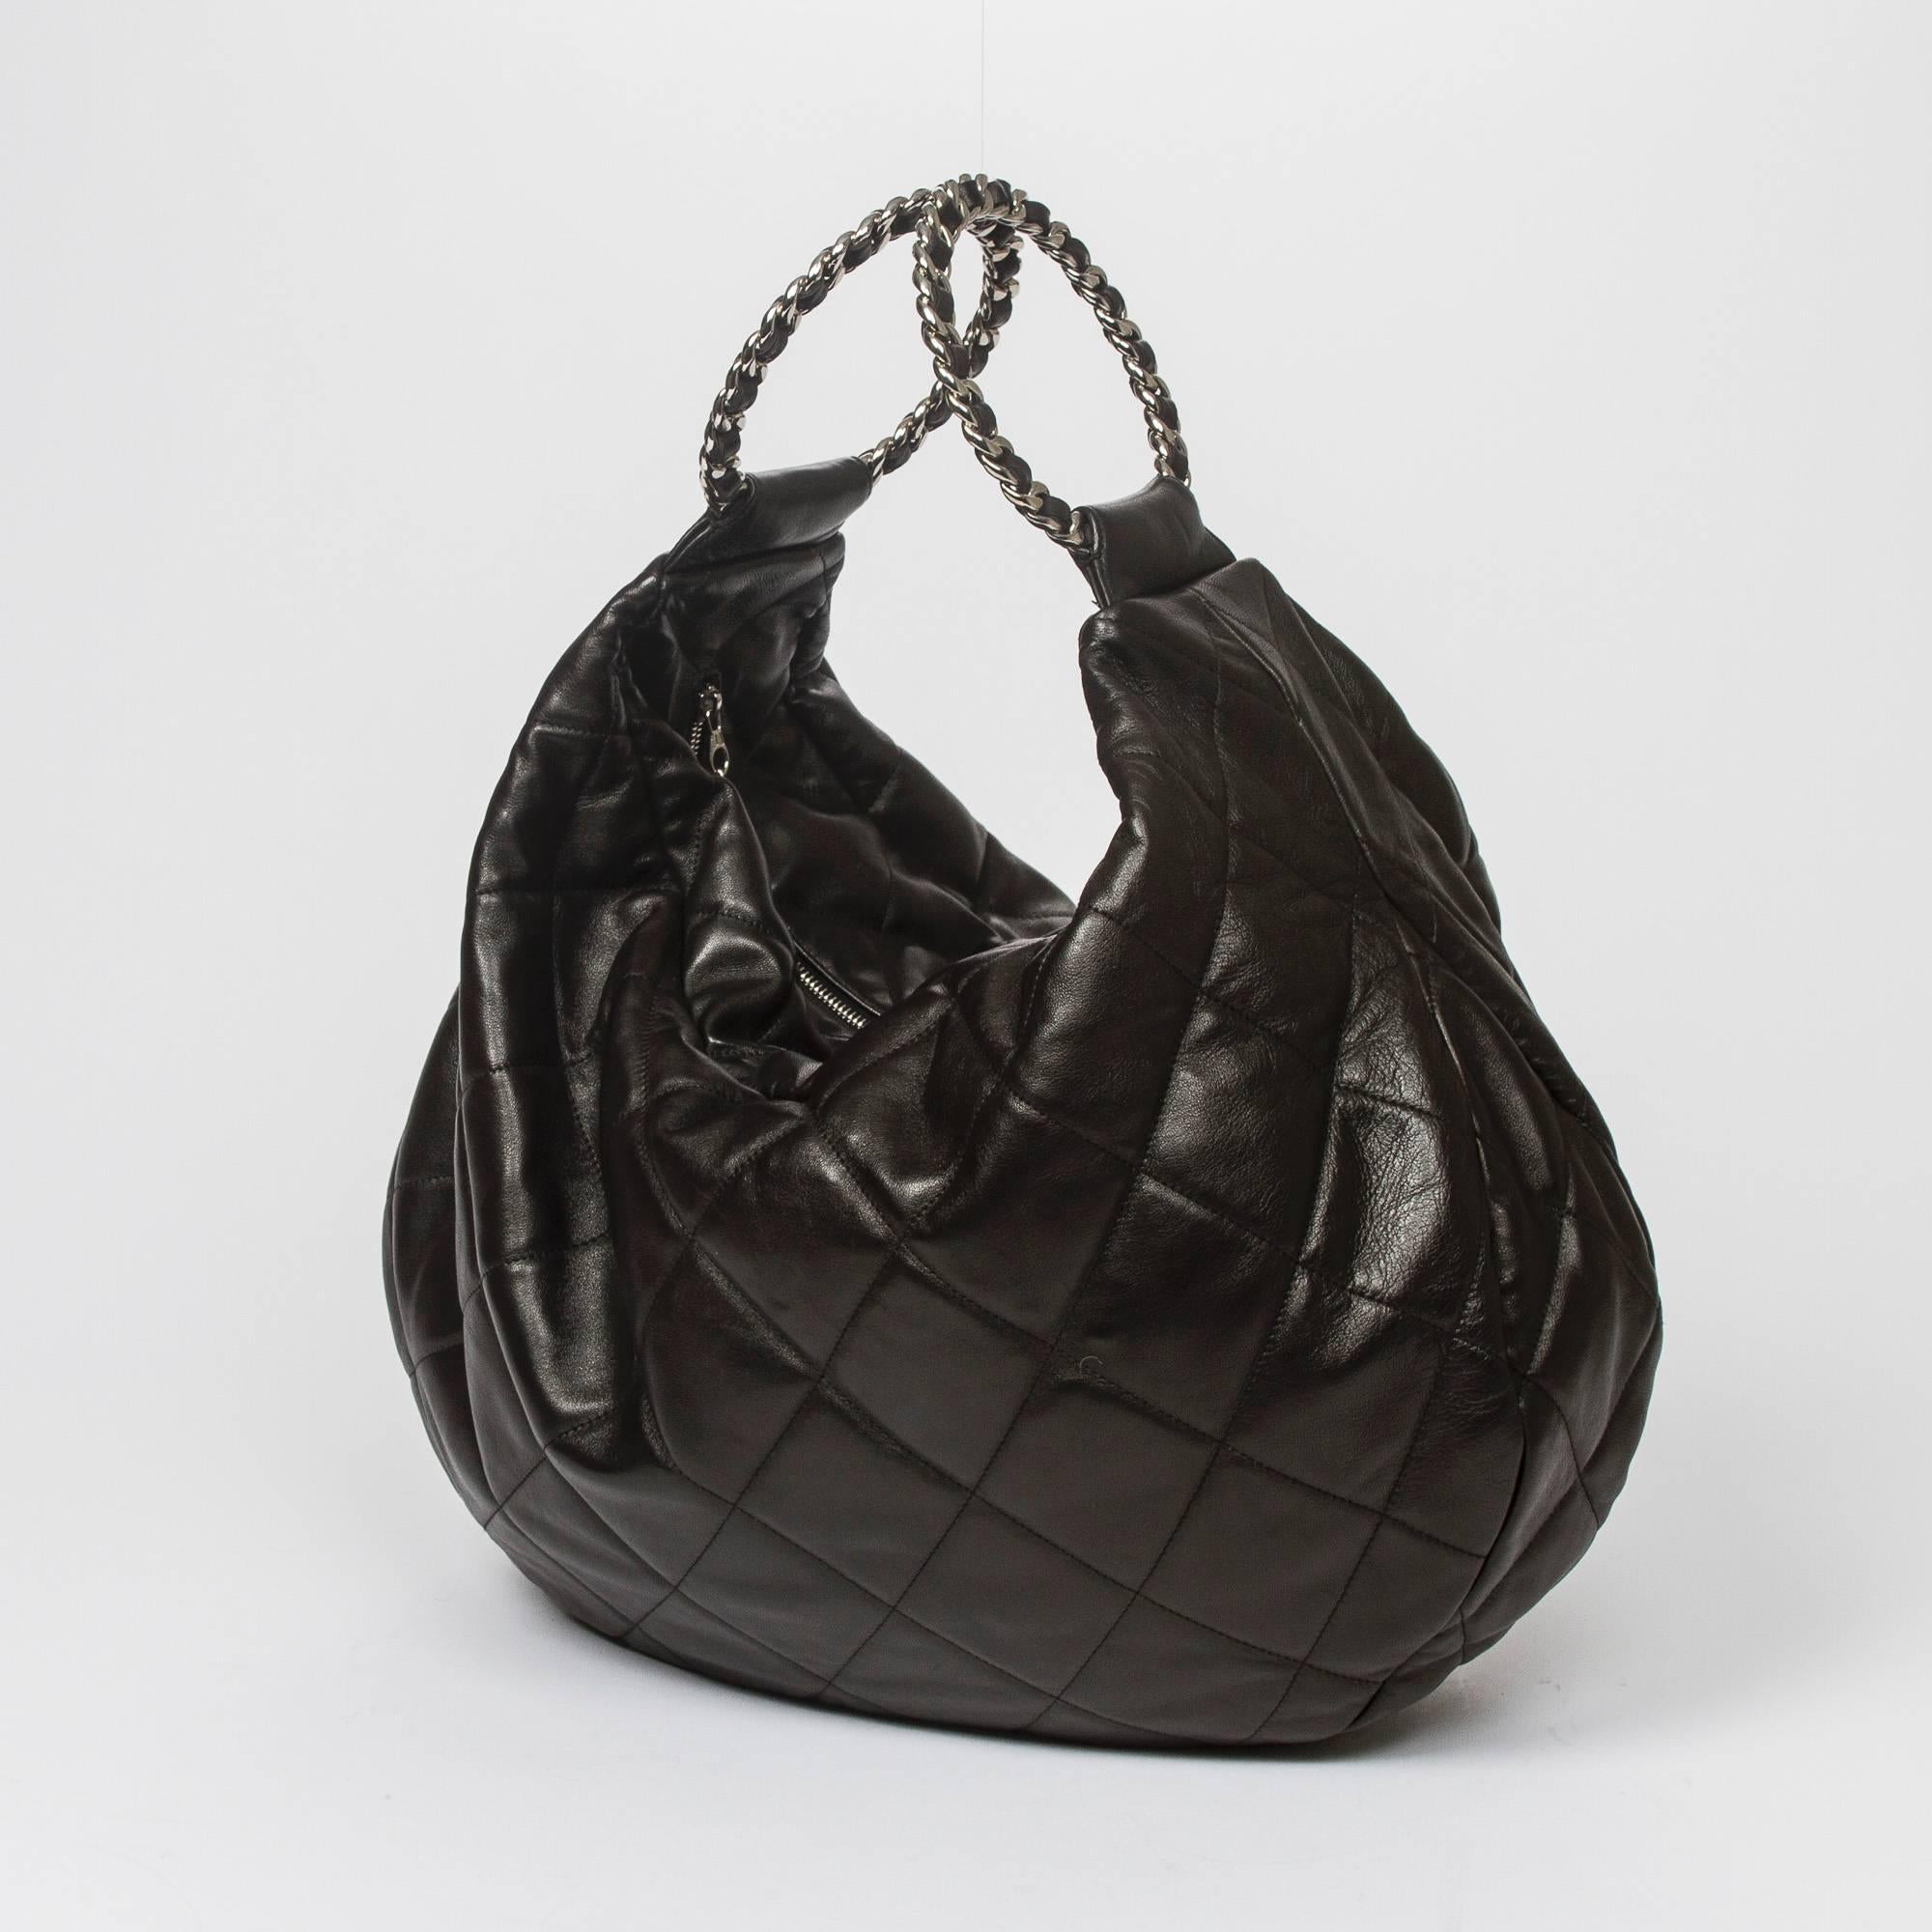 Hobo handbag in black quilted leather, 2 chain motif ring handles interlaced with leather, silver tone hardware. Zip closure. Black fabric lined interior with slip pocket and one zip pocket. Silver tone heat stamps 